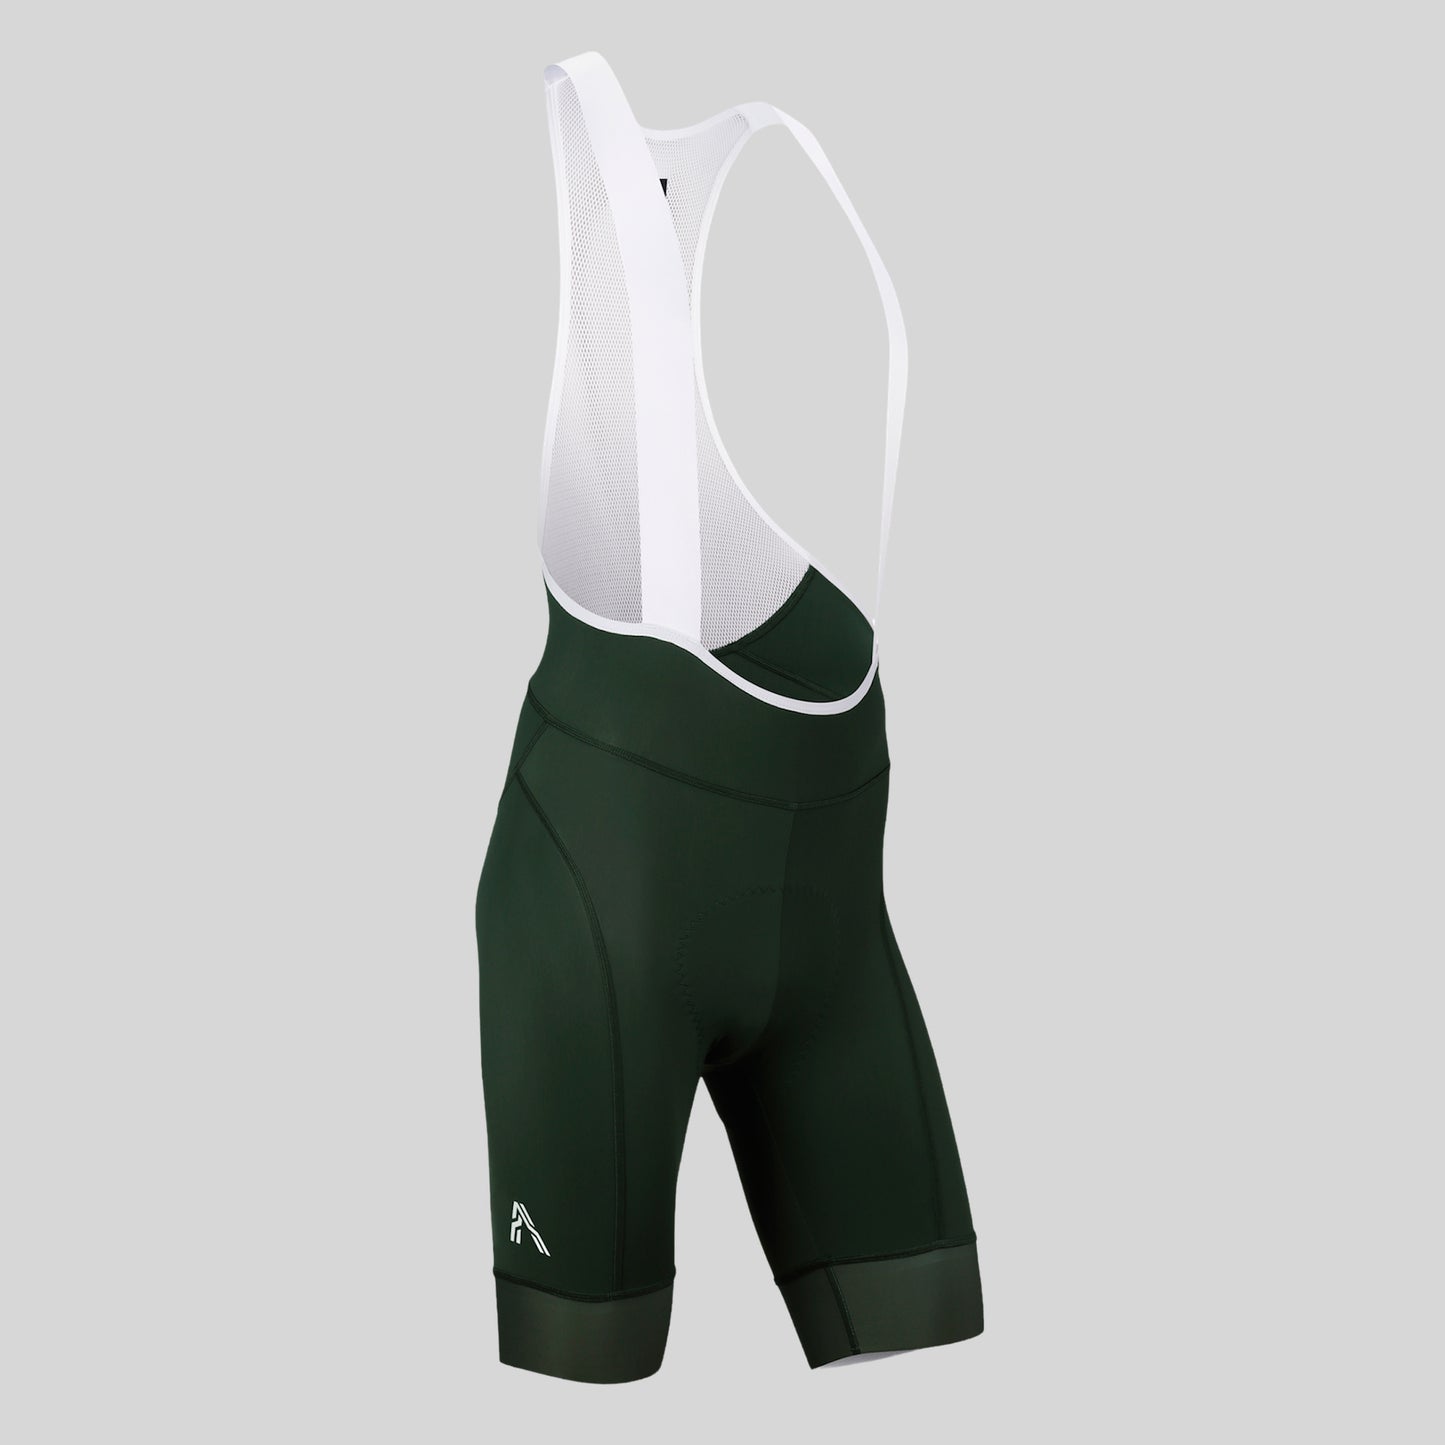 Legend Men Bib Short Olive by Ascender Cycling Club Zürich in Switzerland Front View Right Leg